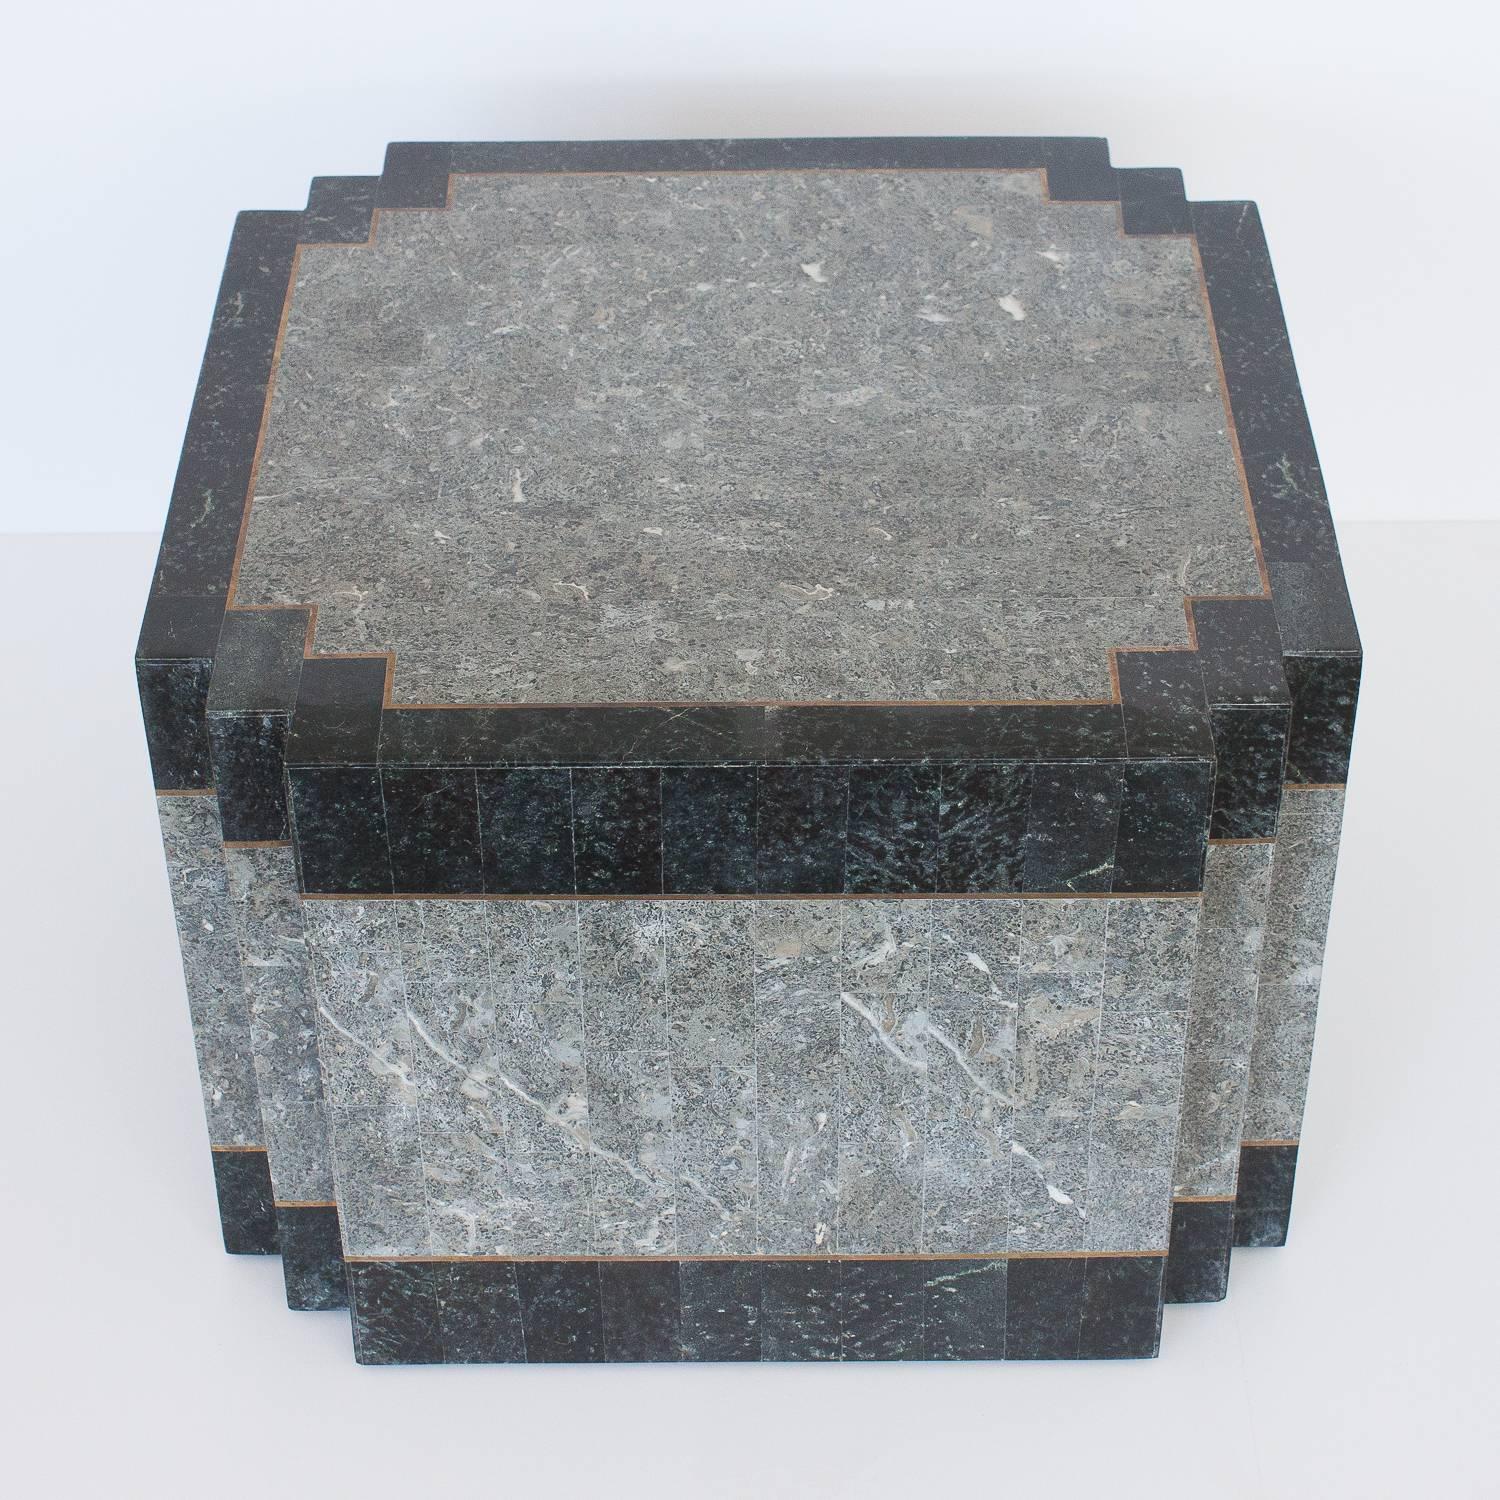 Maitland-Smith tessellated stone table brass inlay. Black and grey stone. This table would work well as a side or end table or small coffee table.